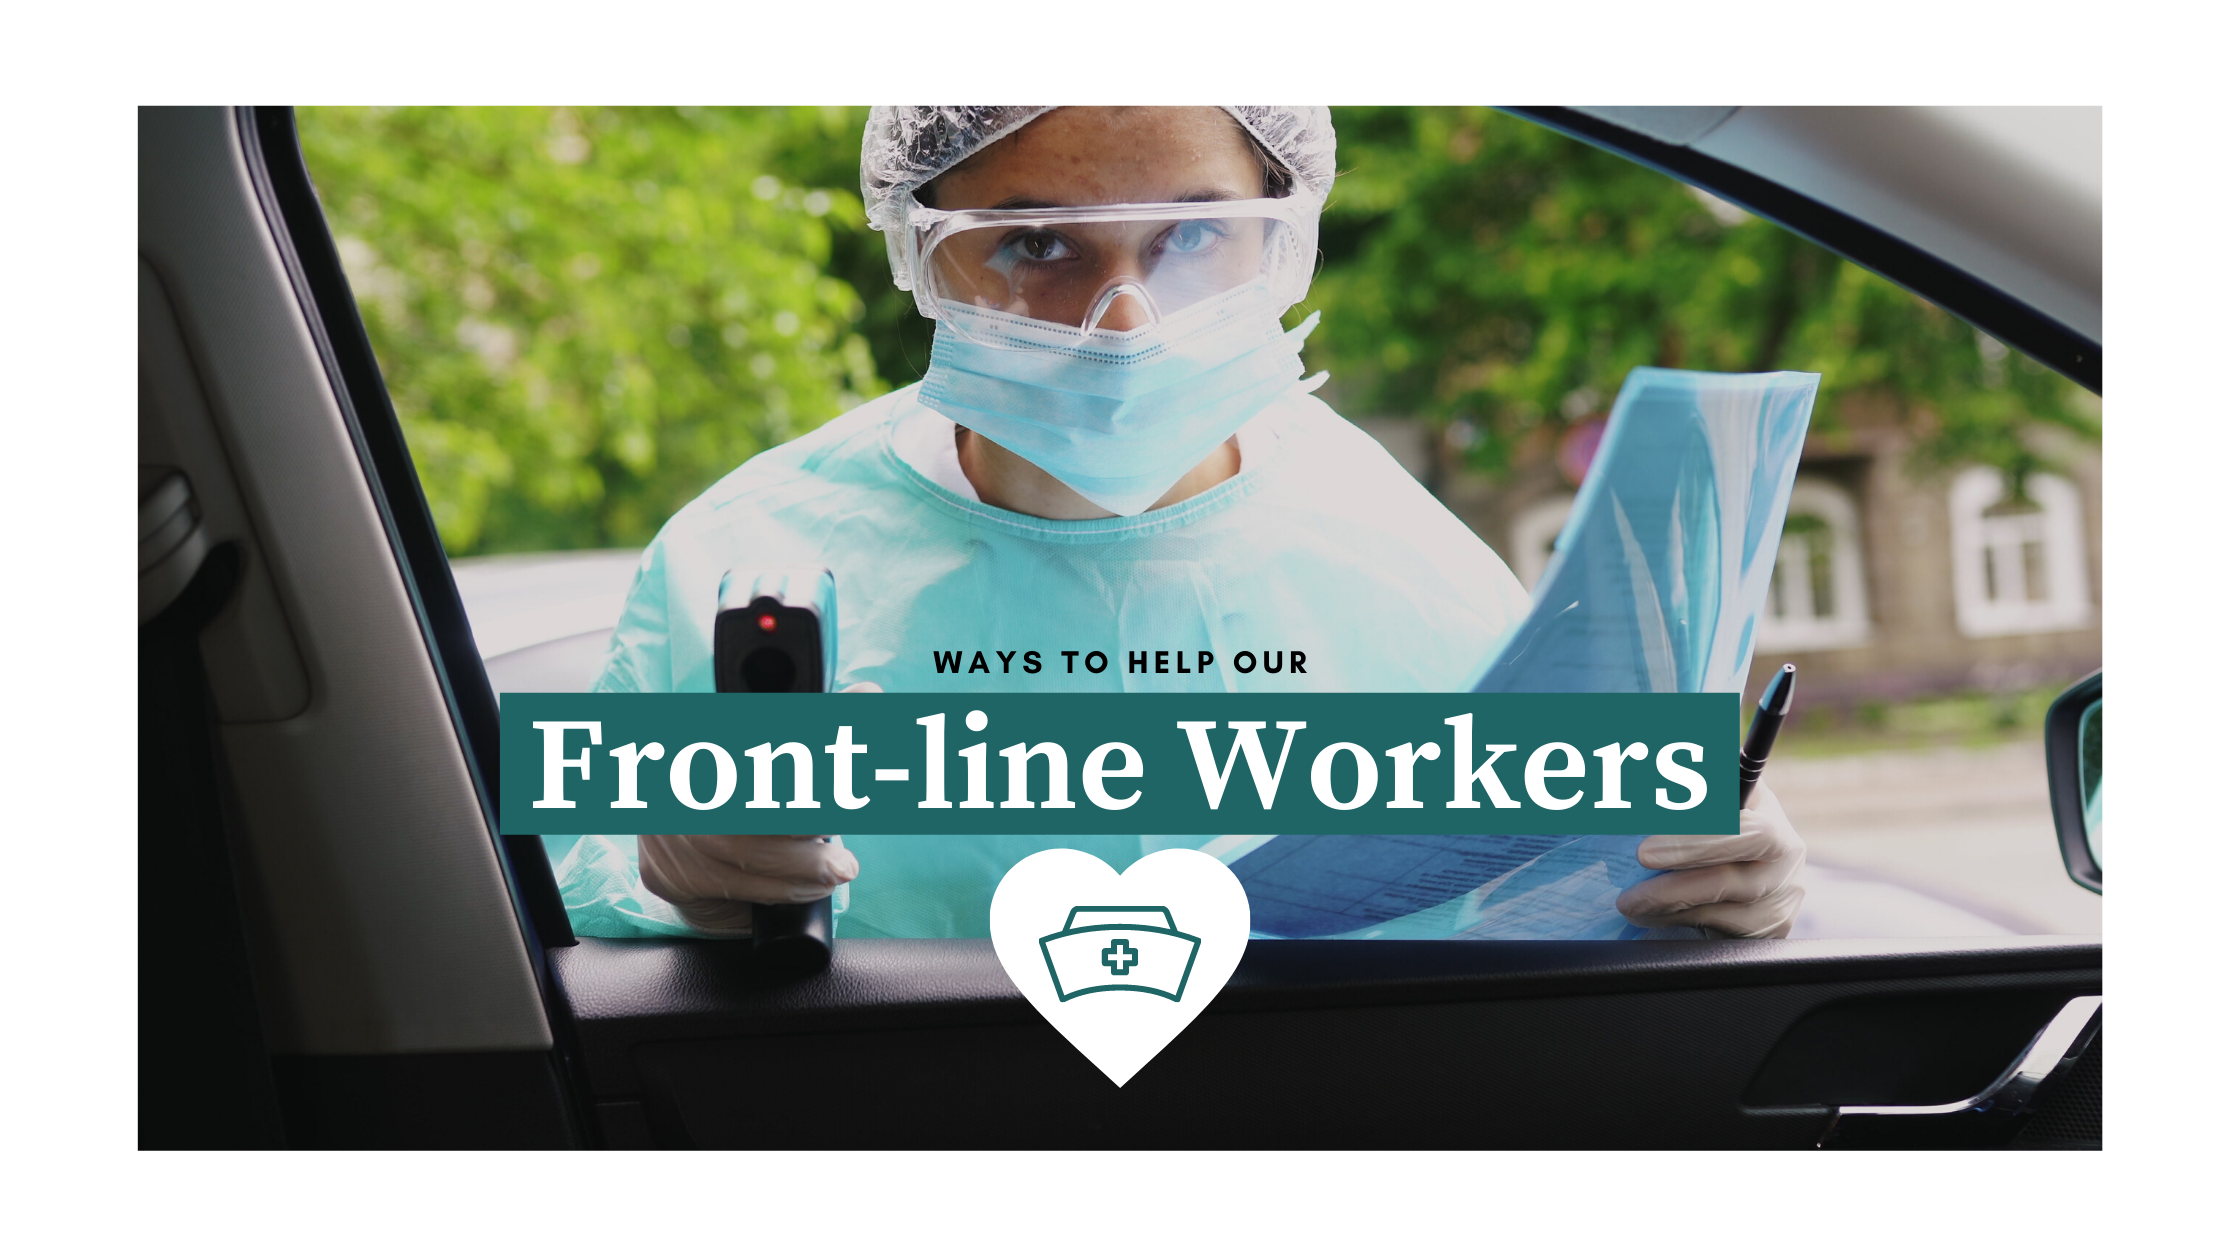 Ways to Help Front-line Workers